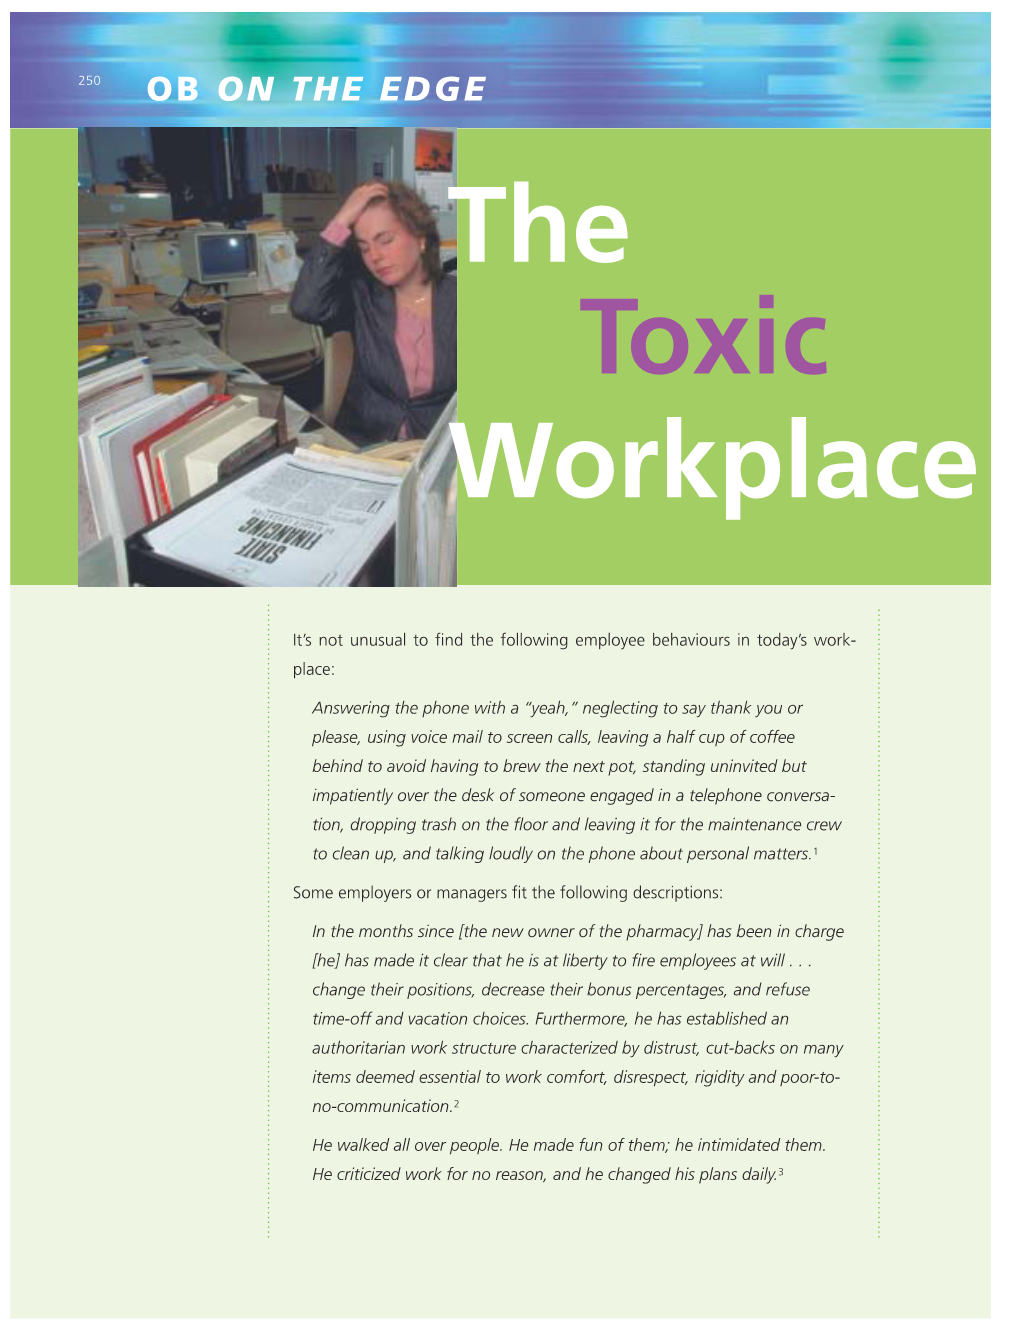 The Toxic Workplace